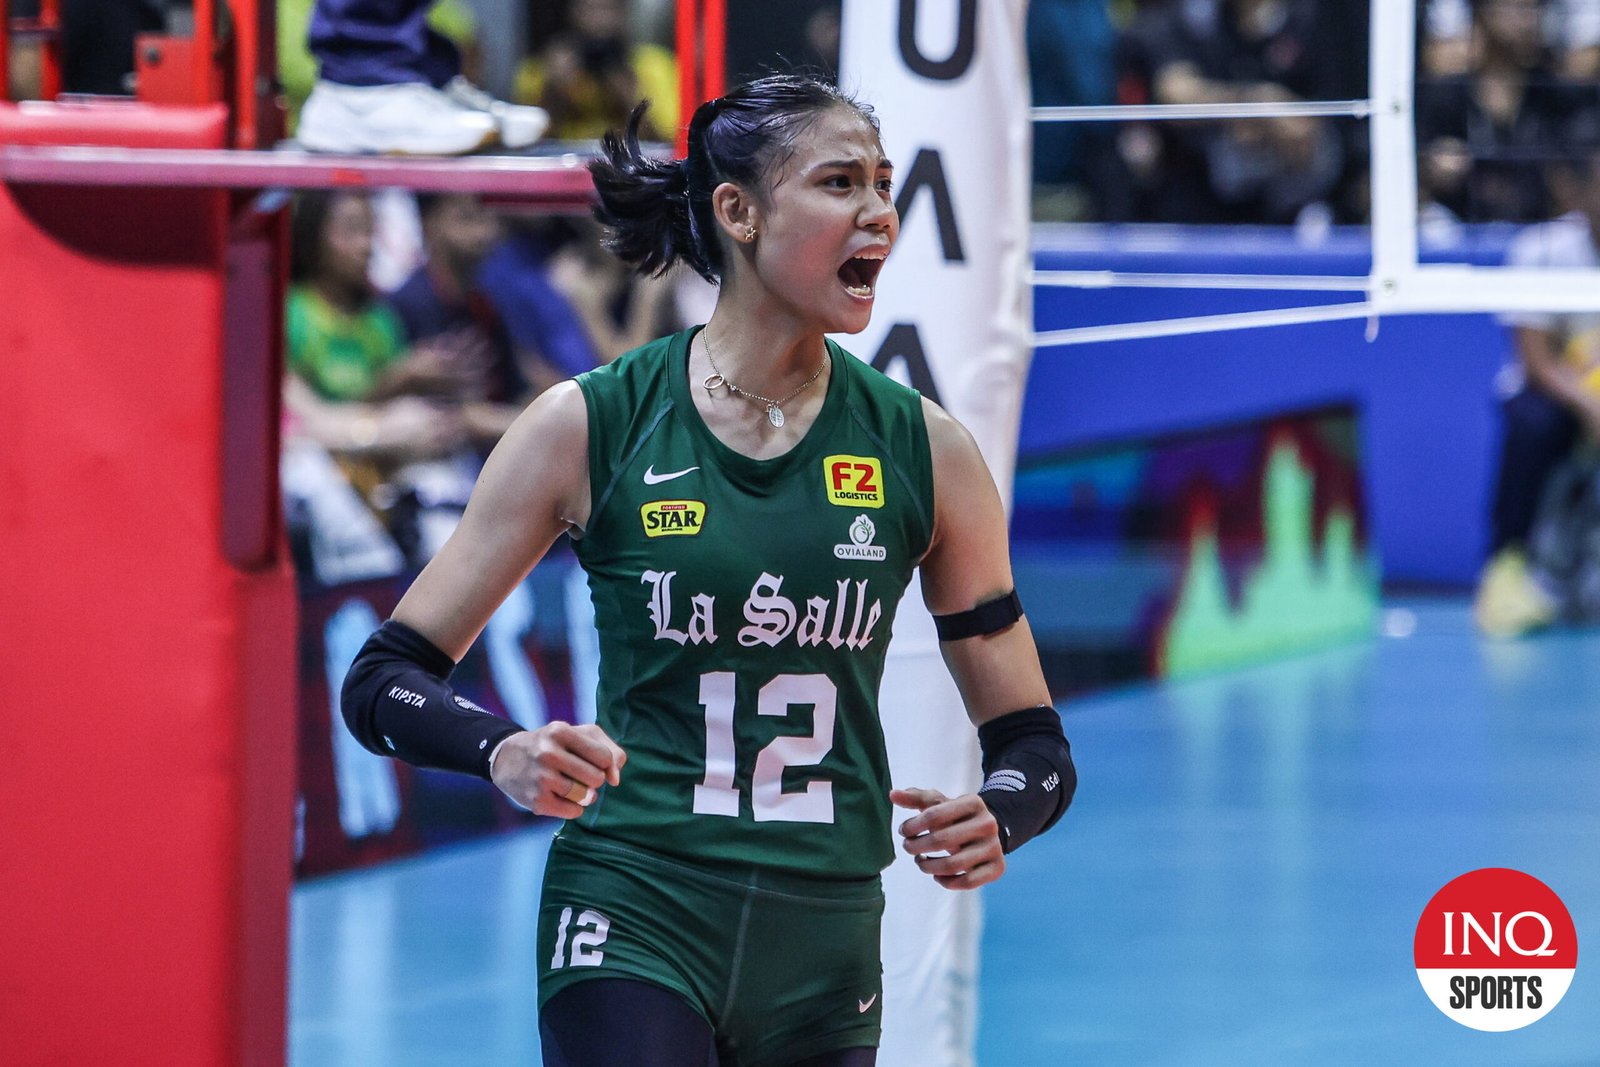 Canino’s return not enough as La Salle misses out on bonus